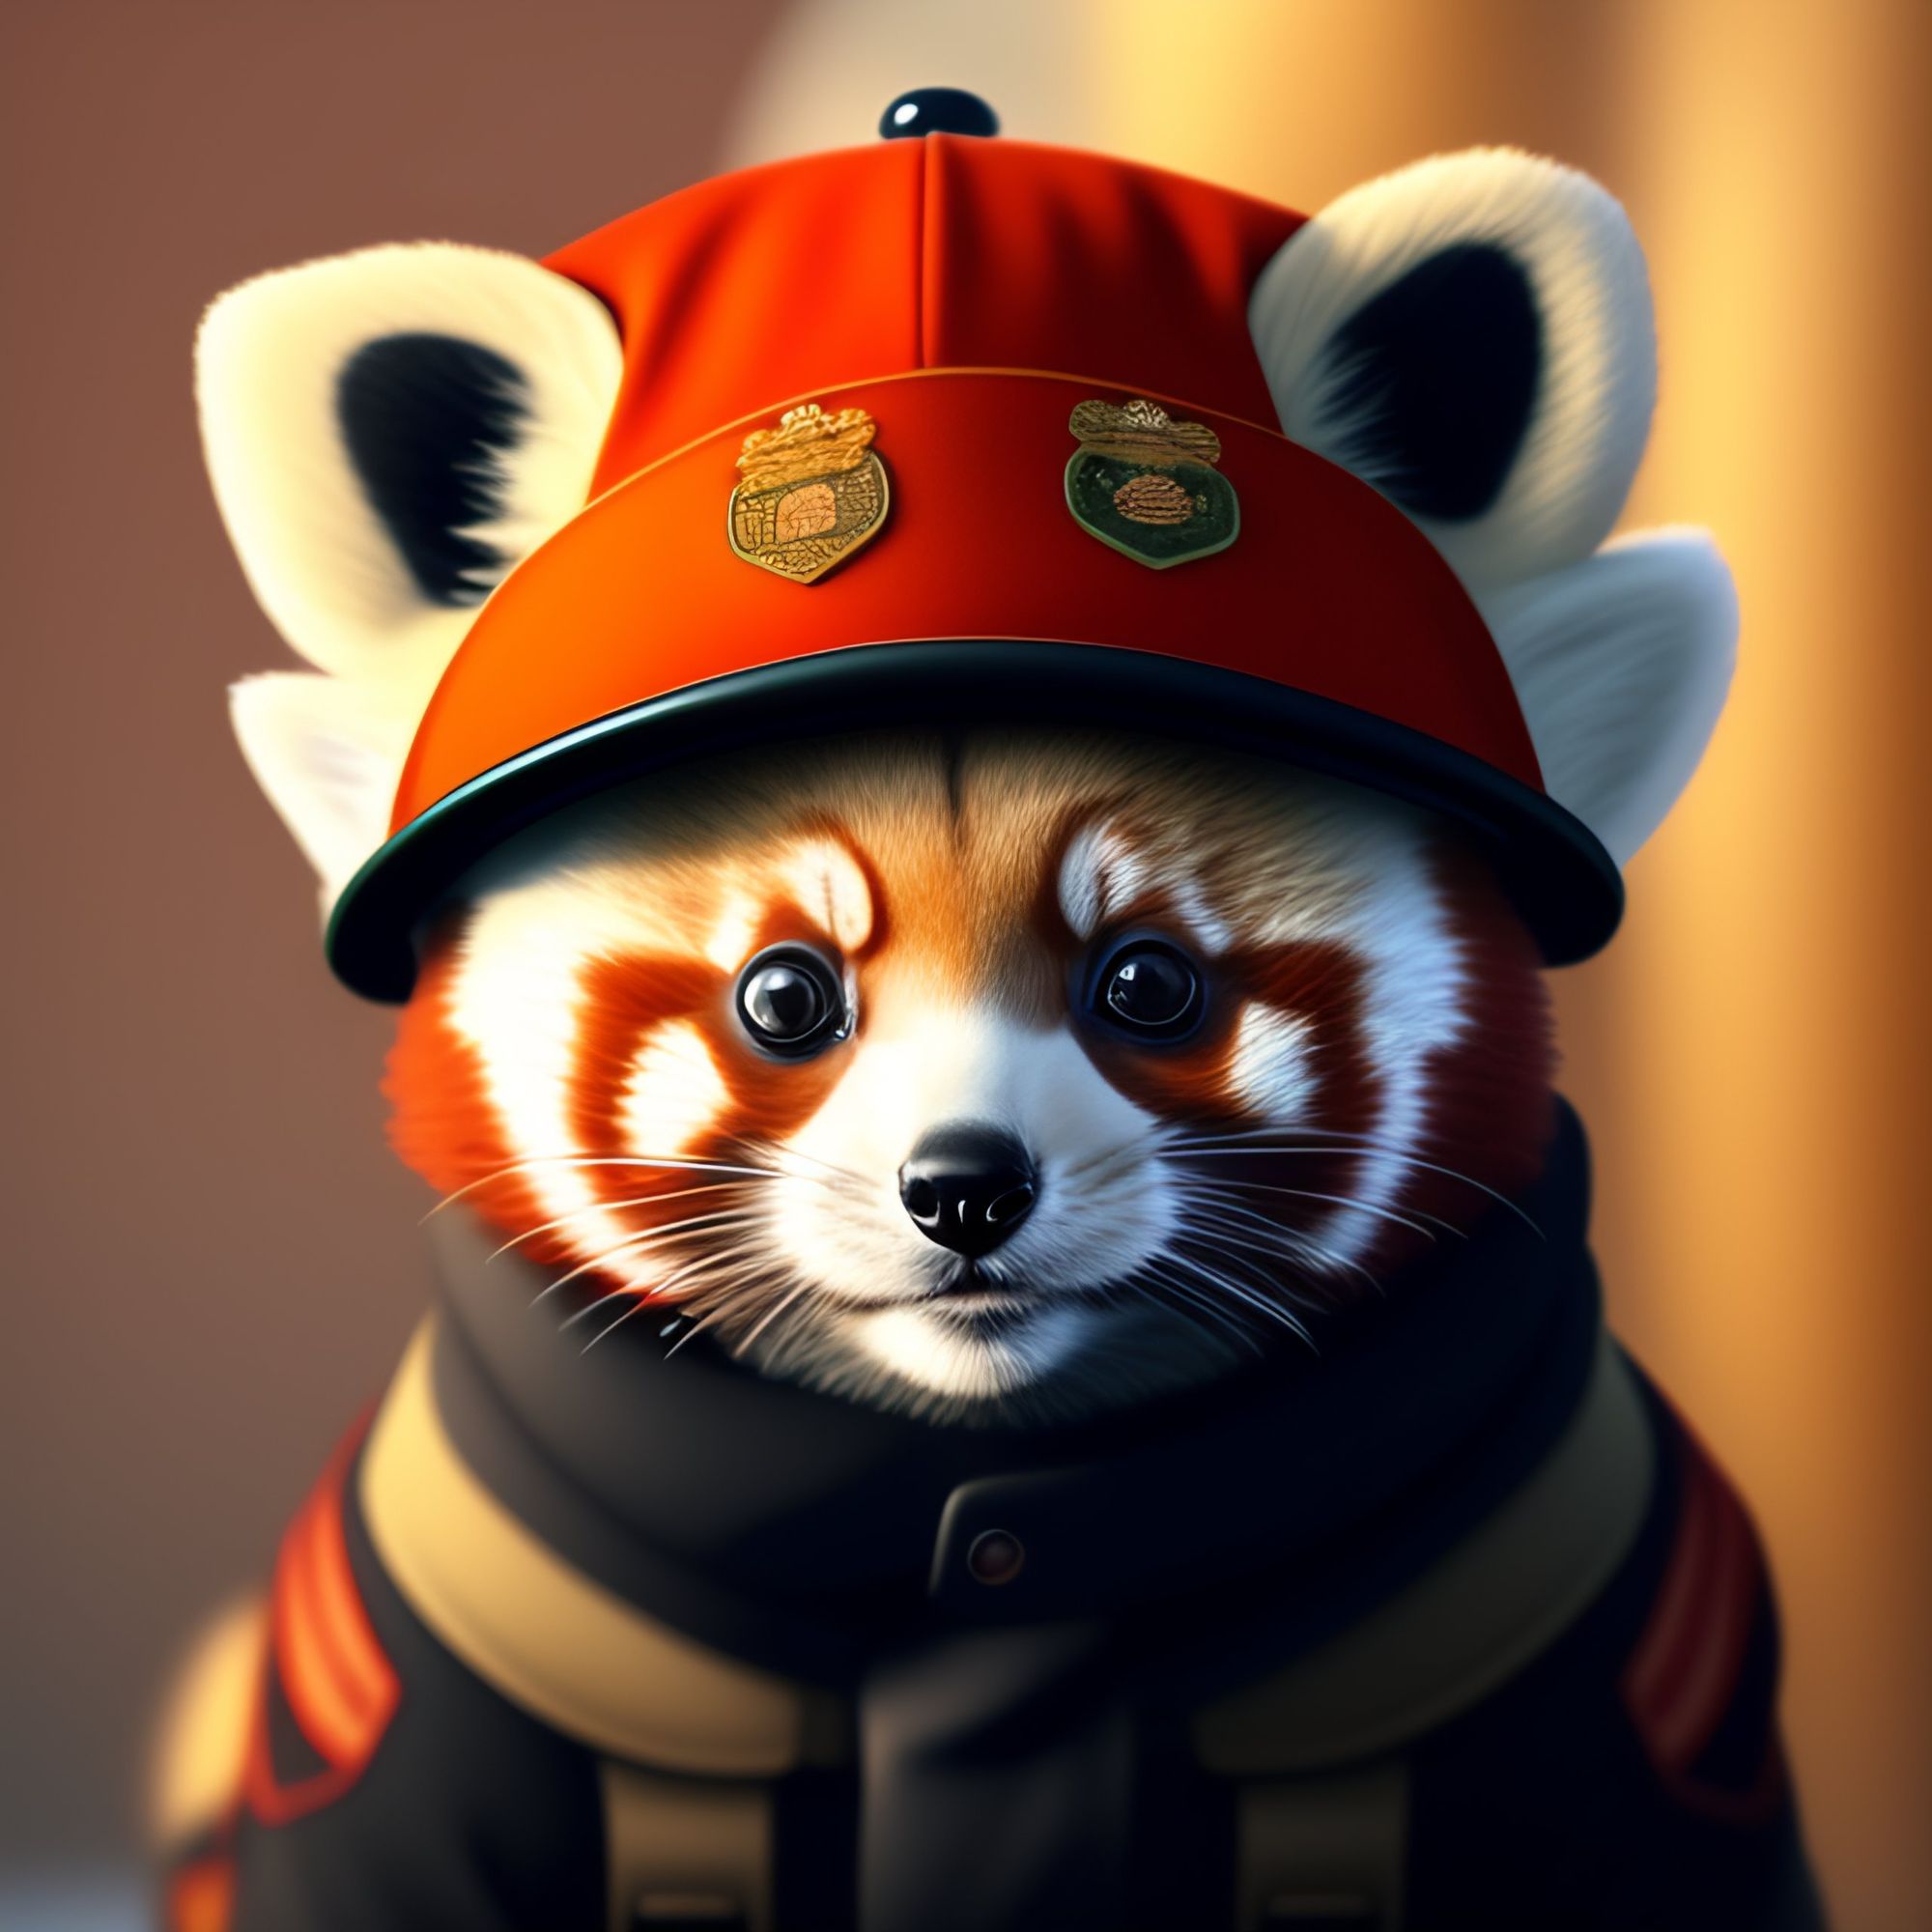 The Hilarious Adventures of Rufus, the Red Panda